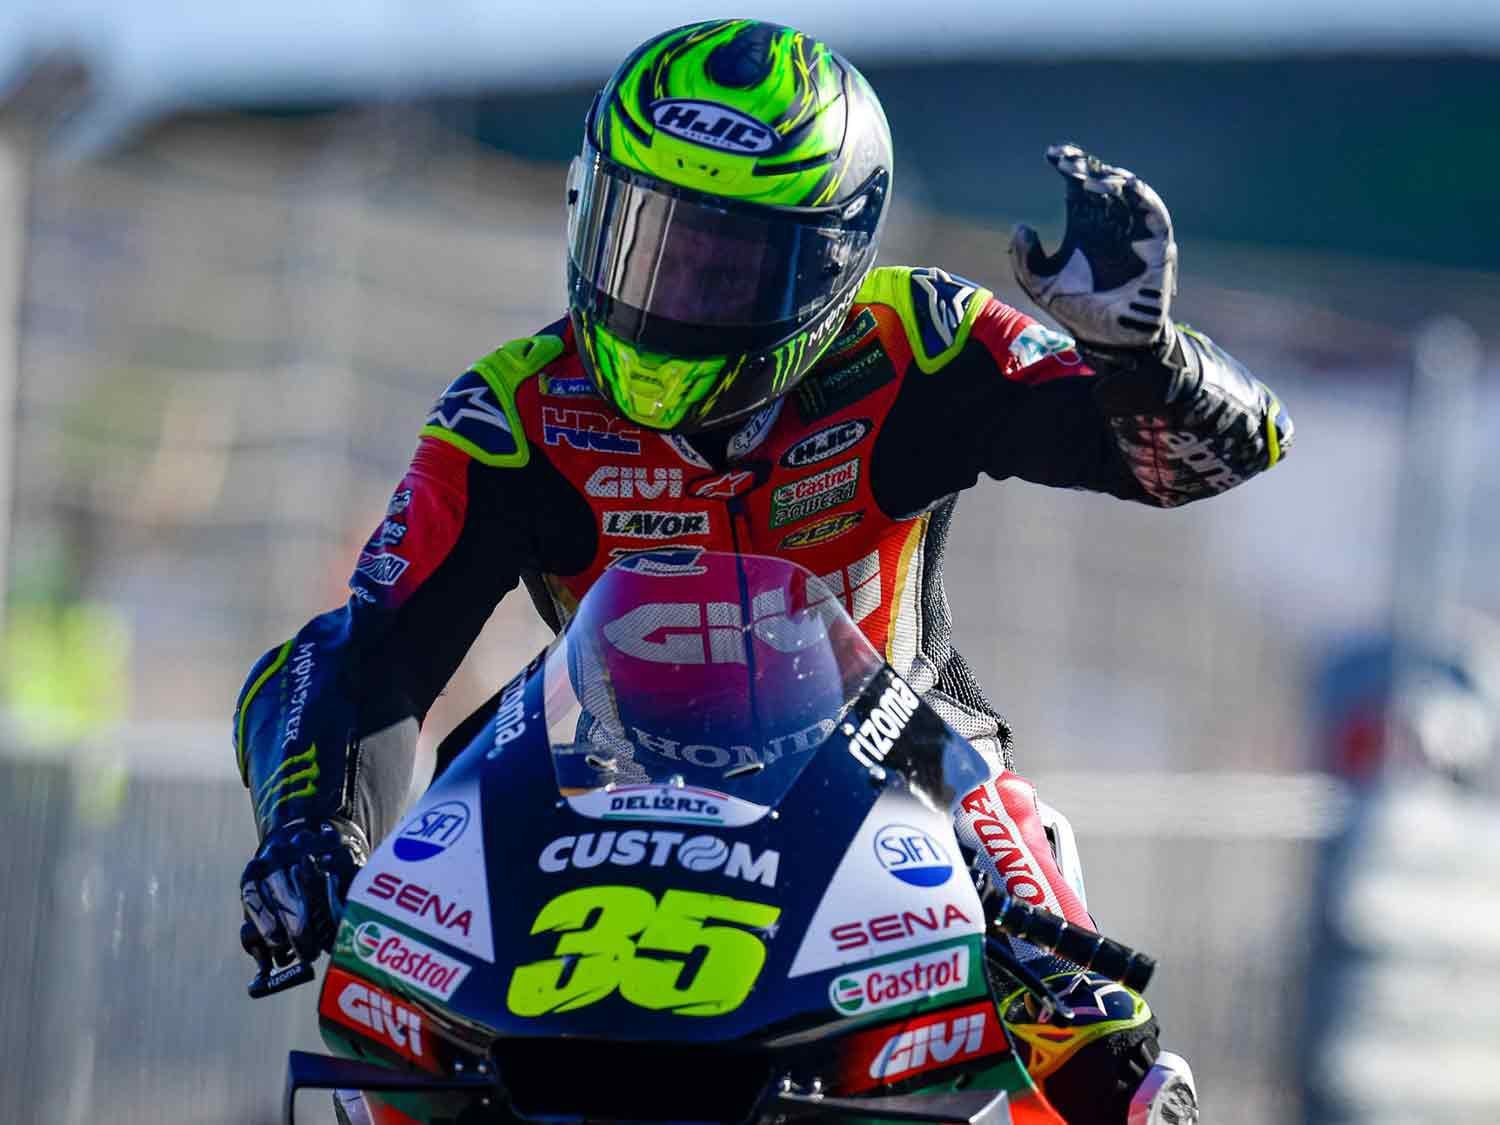 Cal Crutchlow finished his final MotoGP race in 13th.